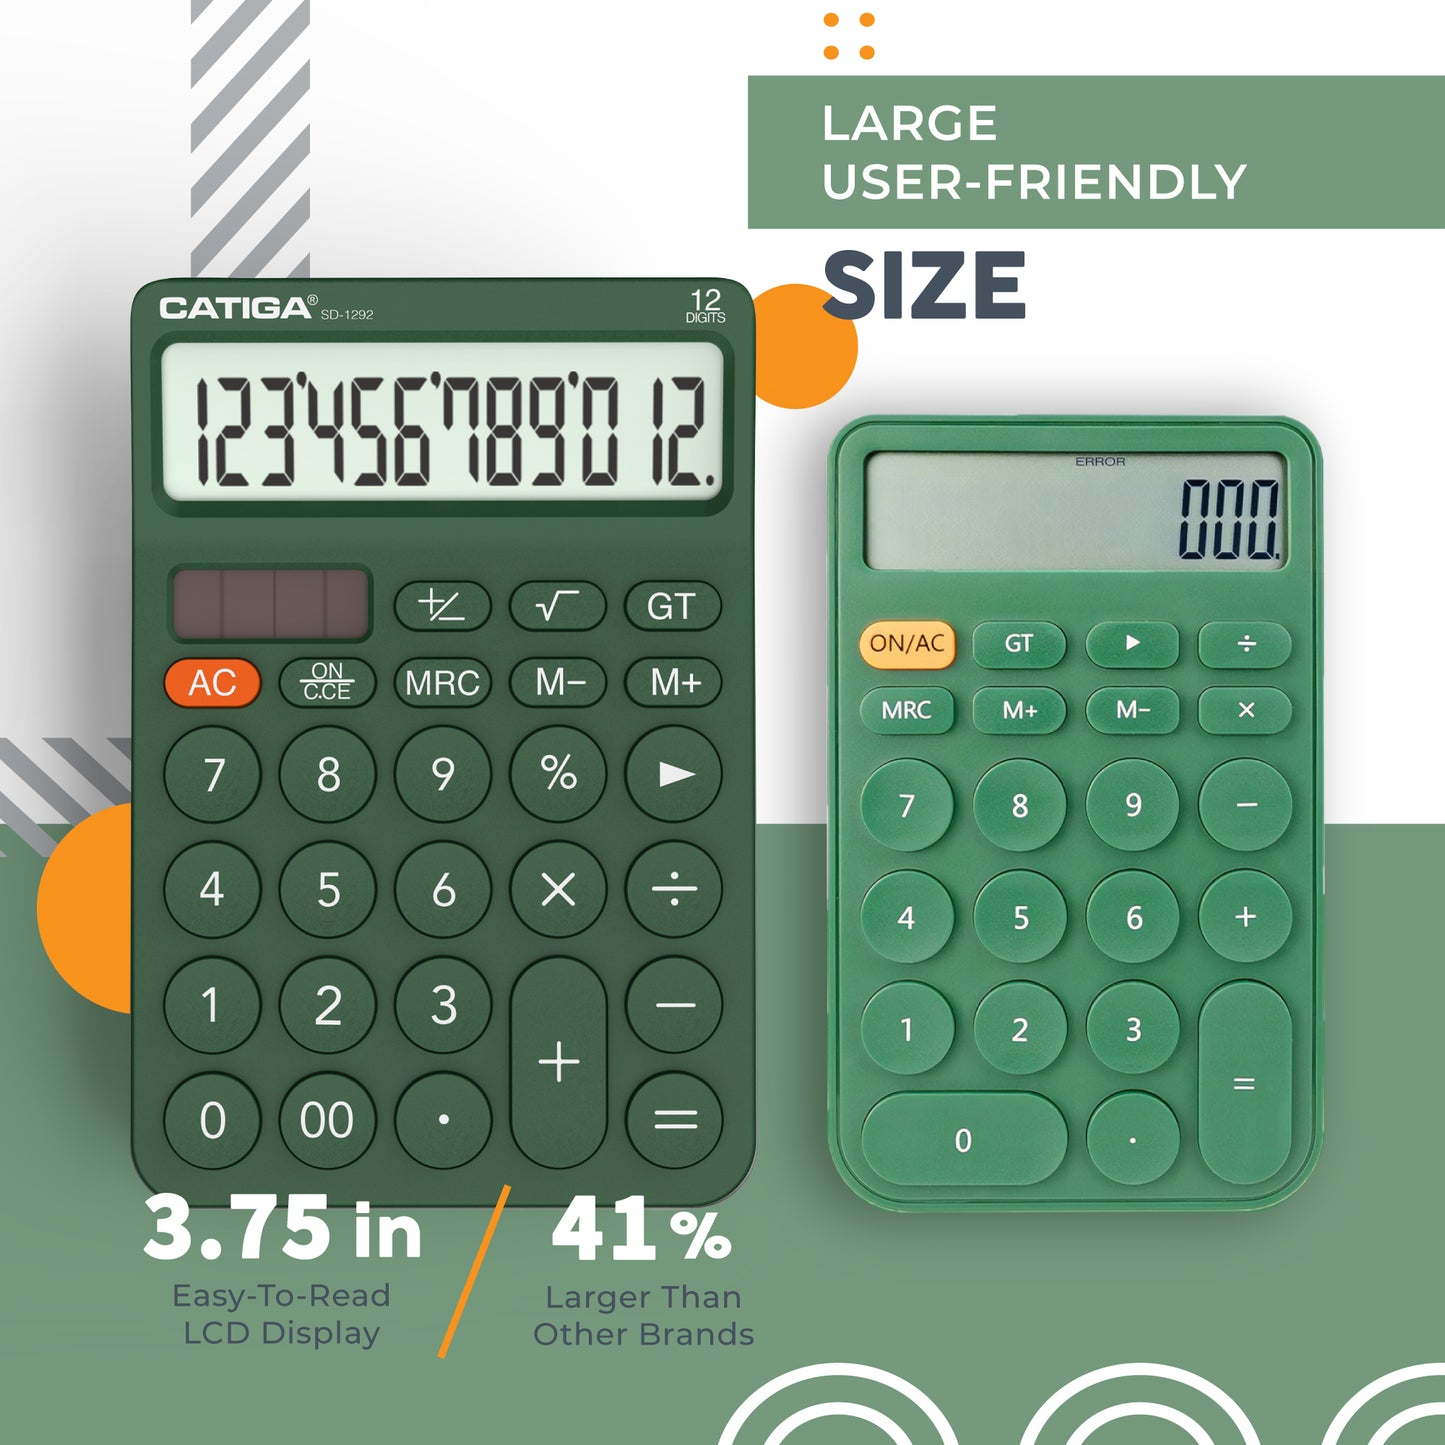 SD-1292 12-Digit Home and Office Calculator (Green)